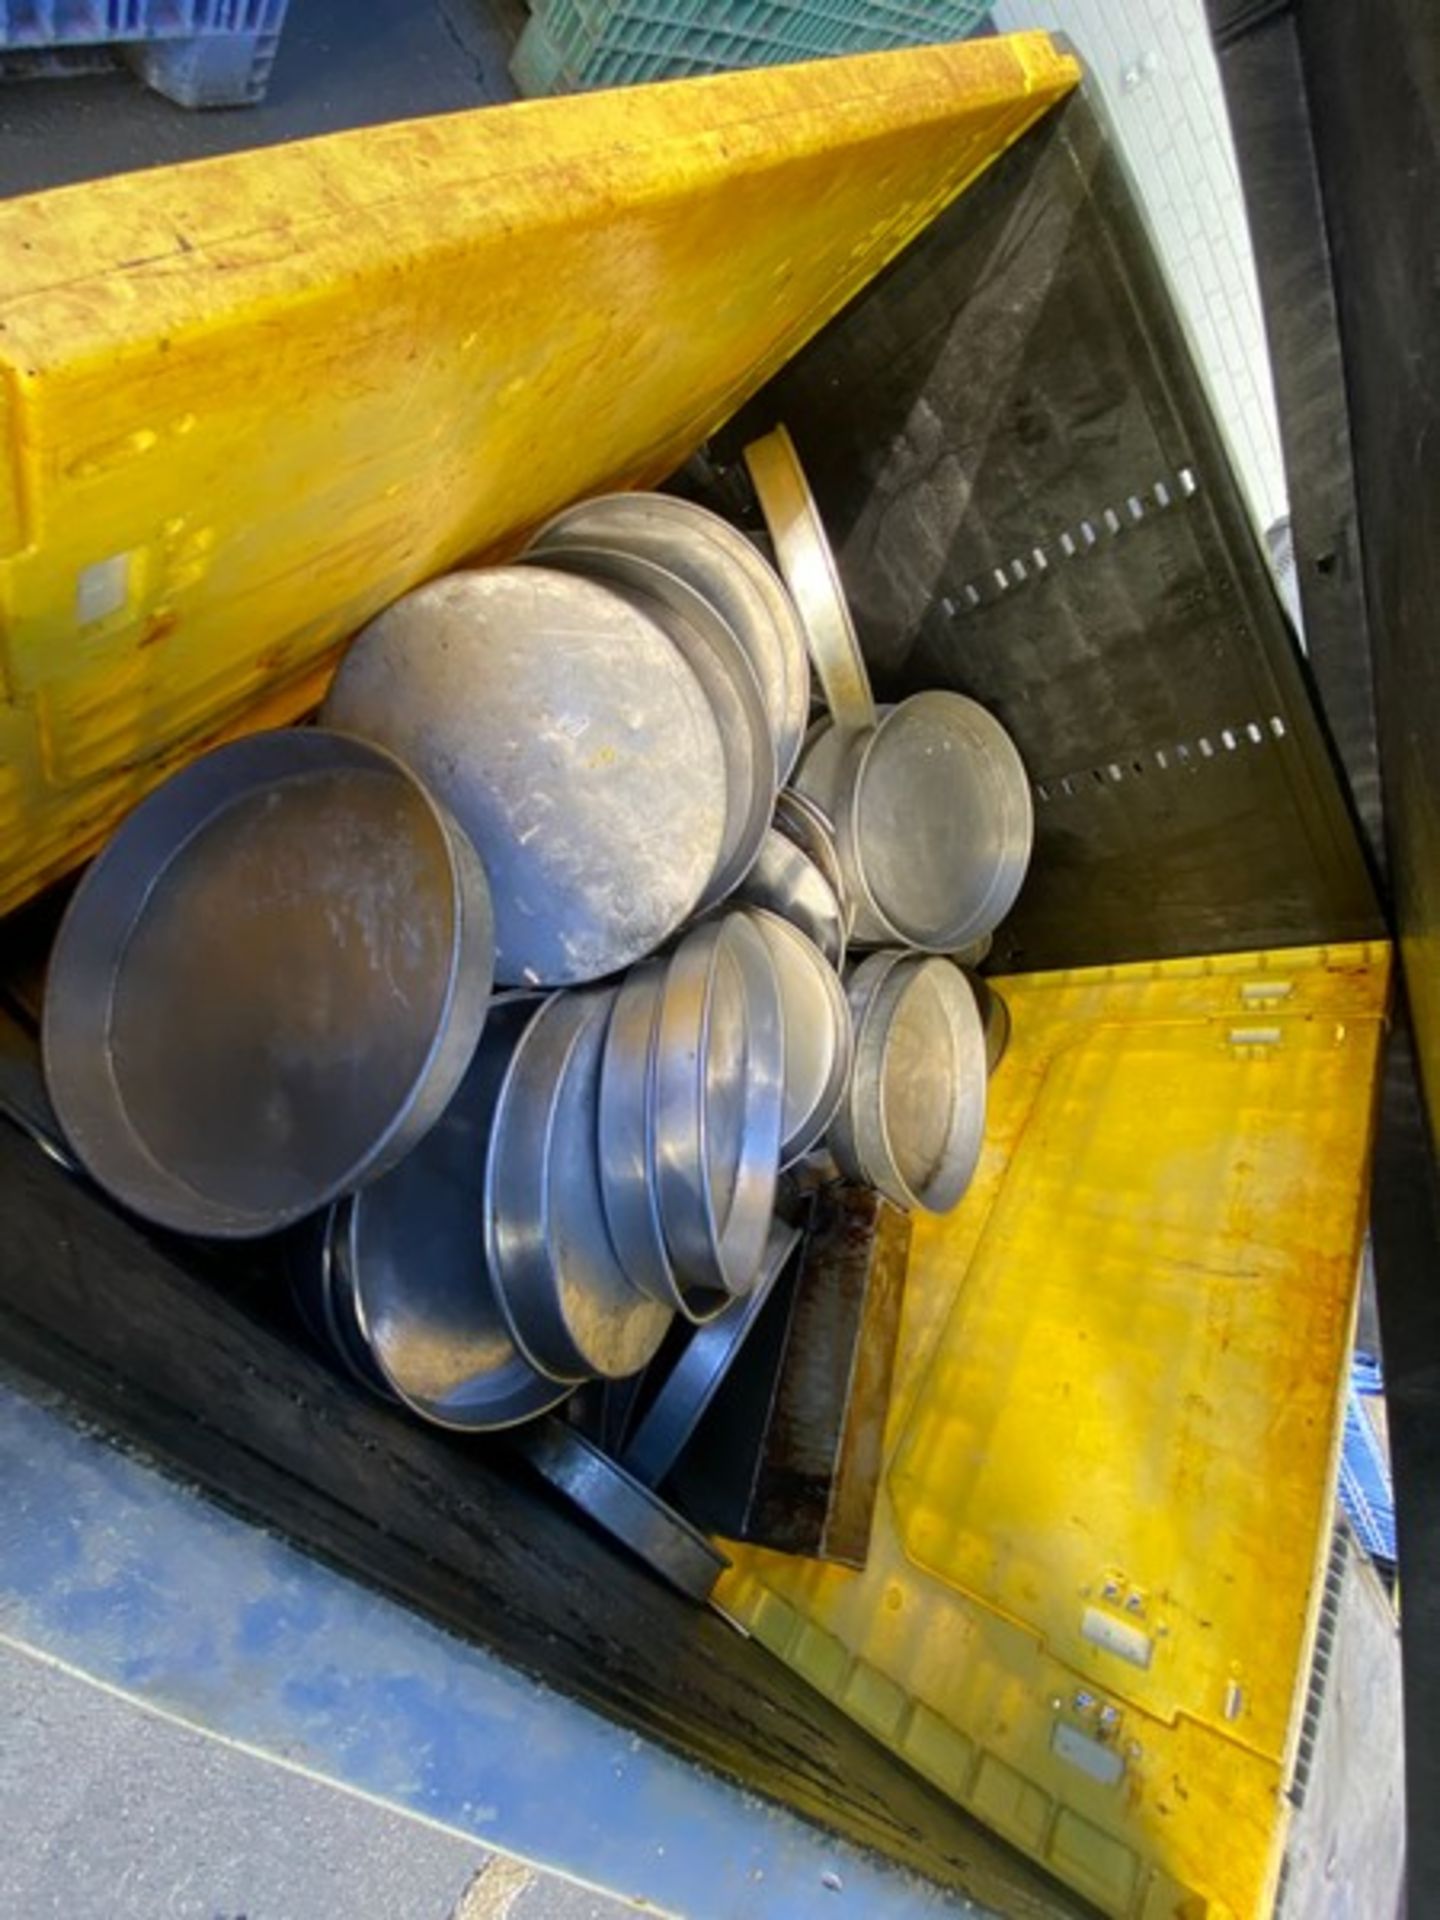 Lot of Assorted 14” Round Aluminum Pans,Aprox. (125) Pans with Aprox. 48” L x 45” W x 49” H - Image 4 of 4